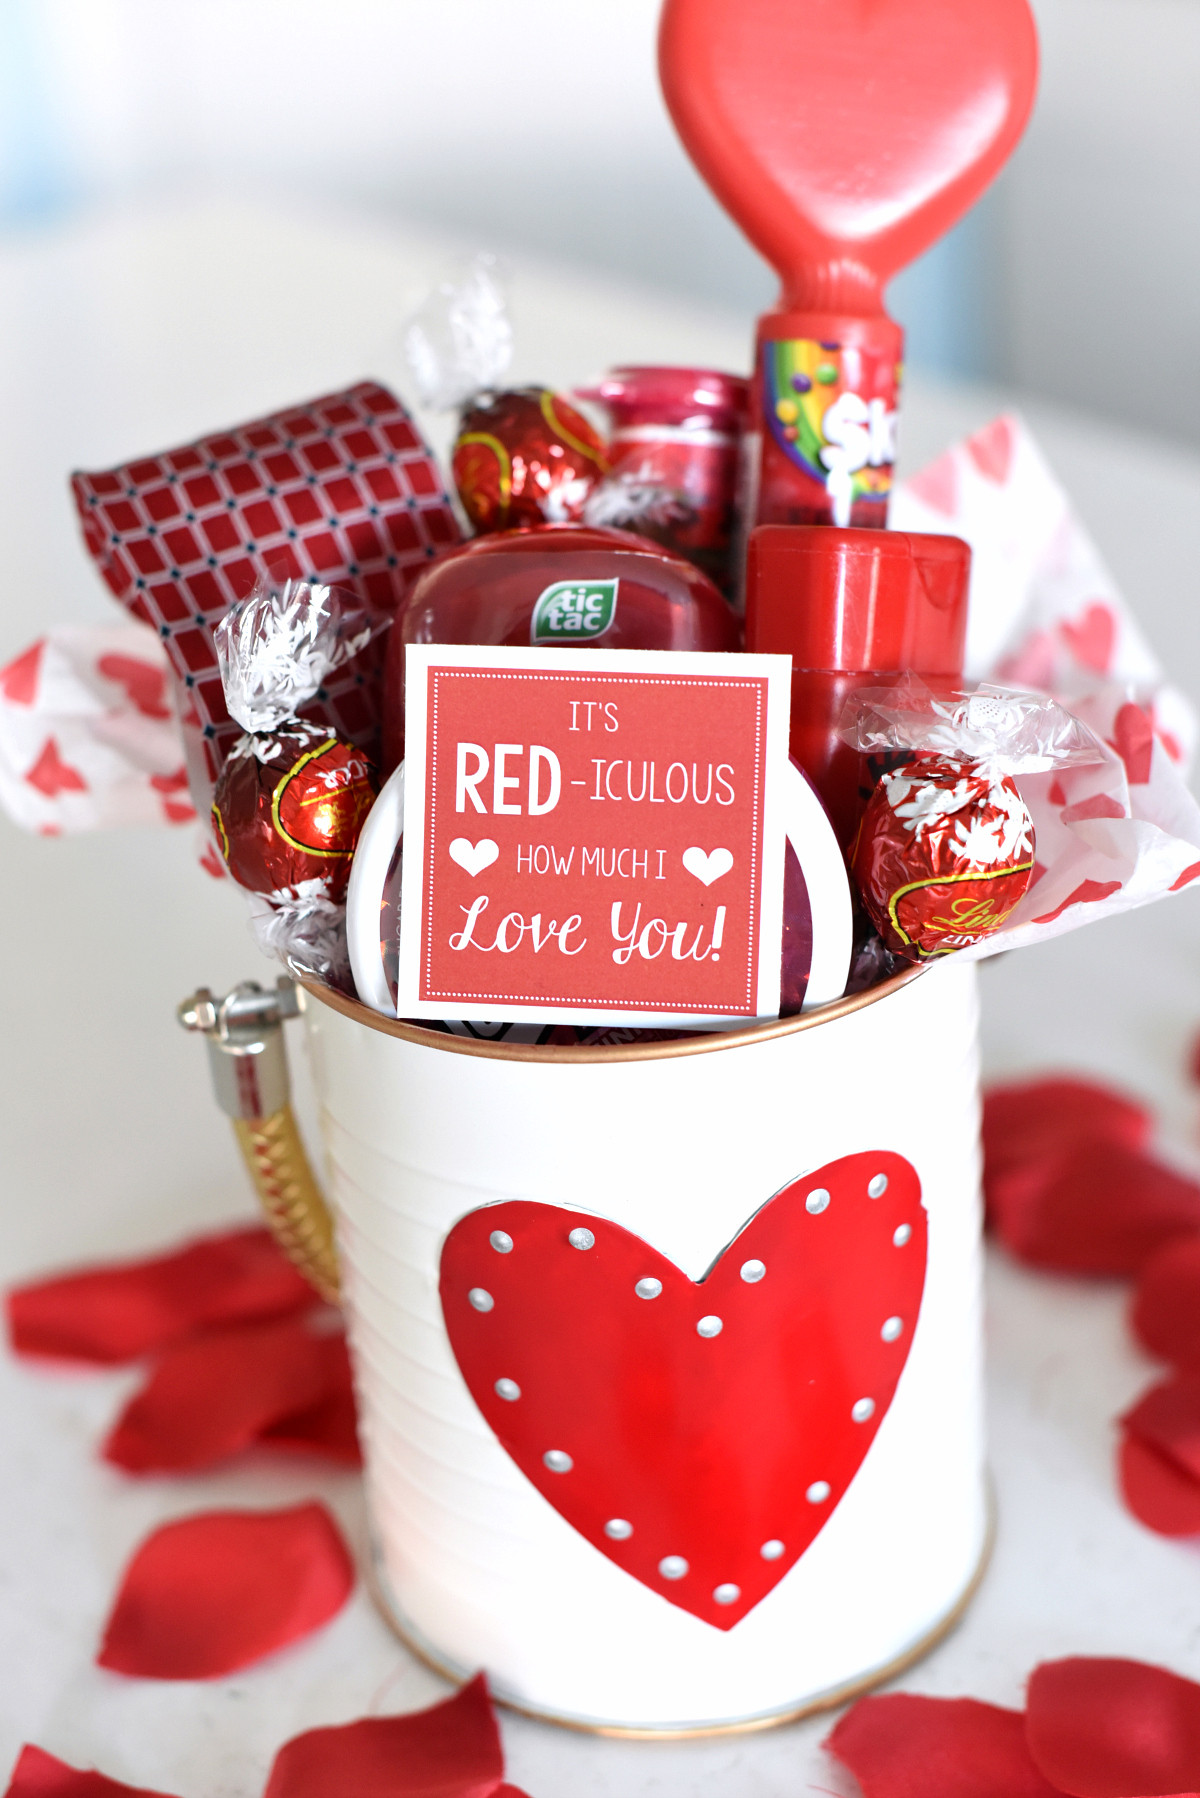 Valentines Gift Ideas For College Students
 25 DIY Valentine s Day Gift Ideas Teens Will Love